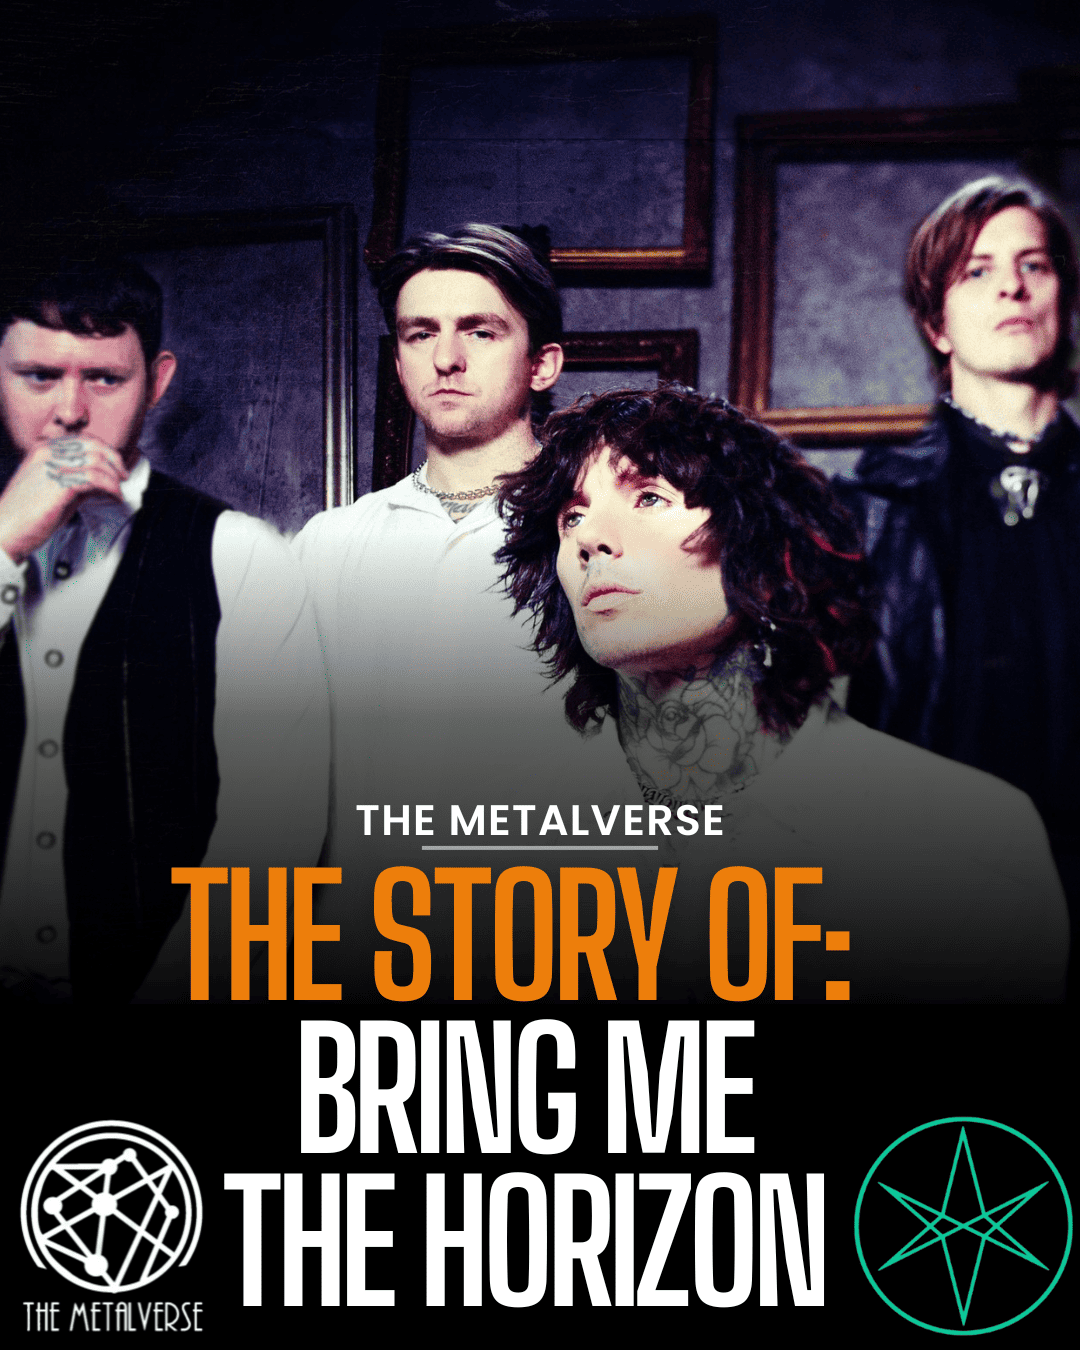 Bring Me The Horizon: Taking Metalcore to the Mainstage